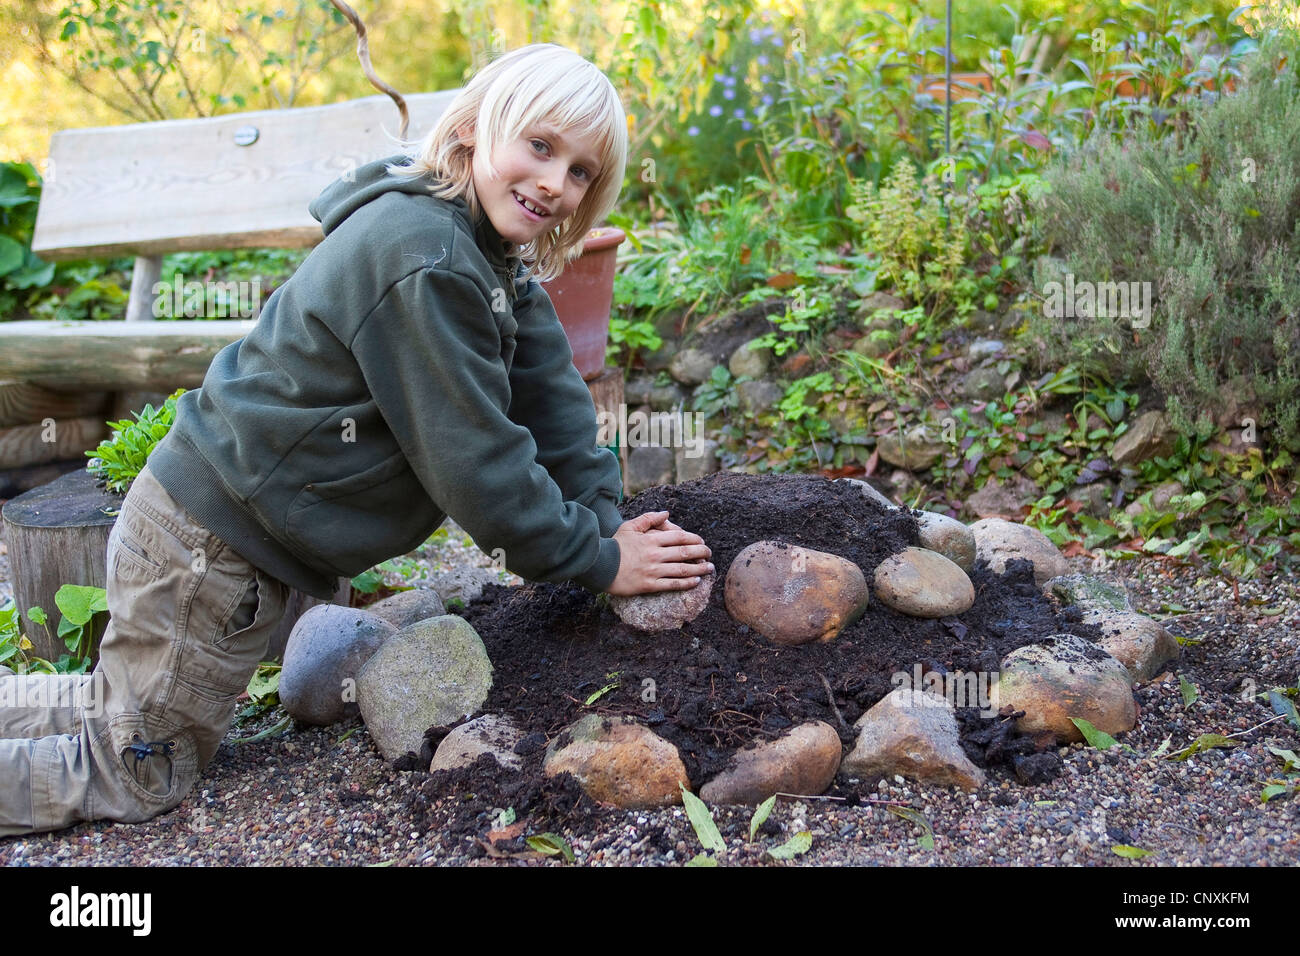 boy building a herb spiral in a garden, Germany Stock Photo